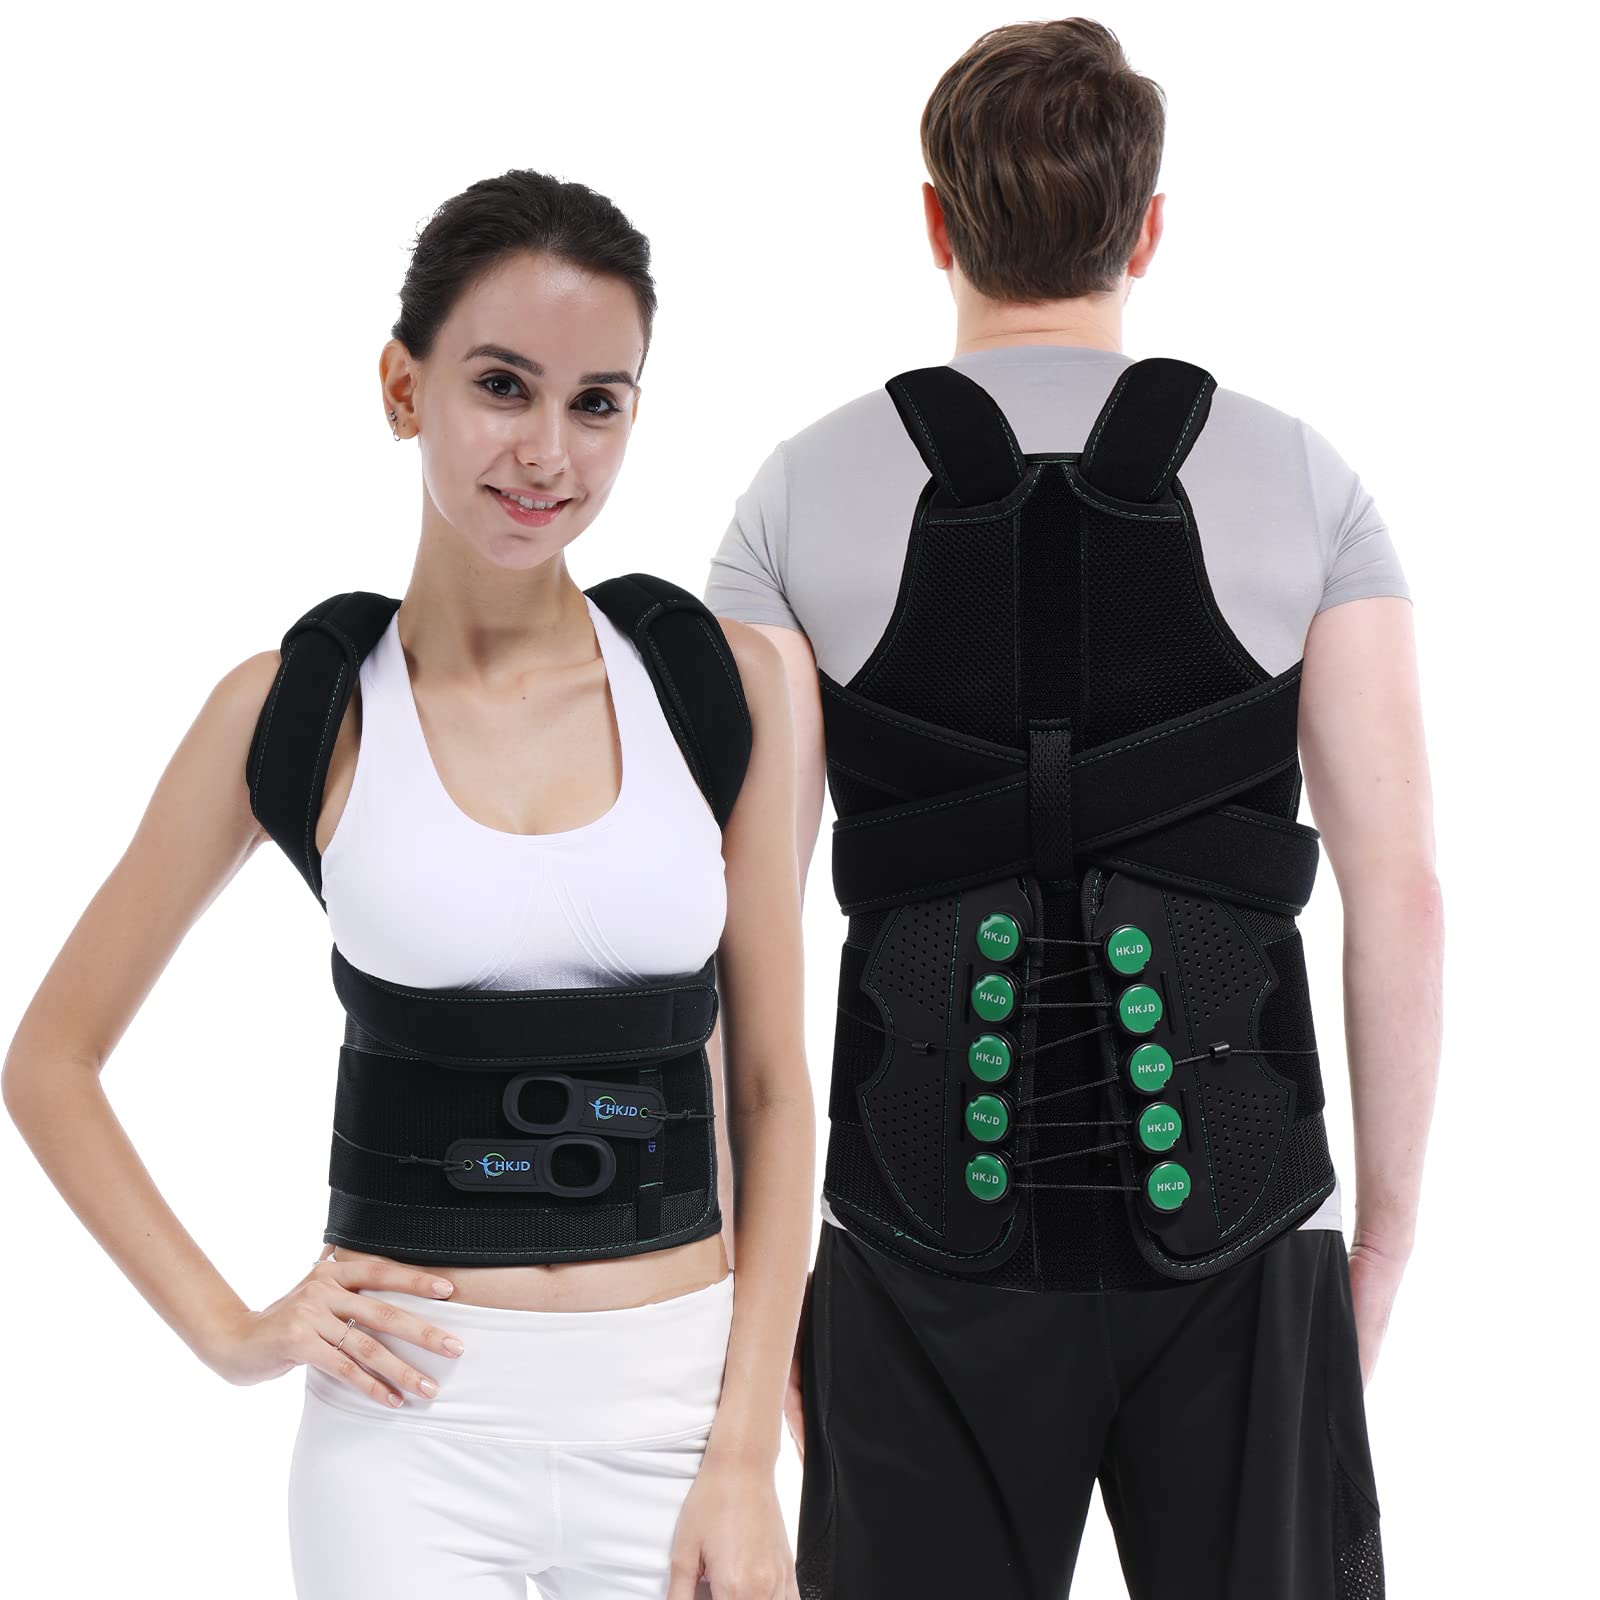 TLSO Thoracic Full Back Brace- Thoracic Lumbar Sacral Orthotic Compression  Fractures Upper Spine Injuries Pre or